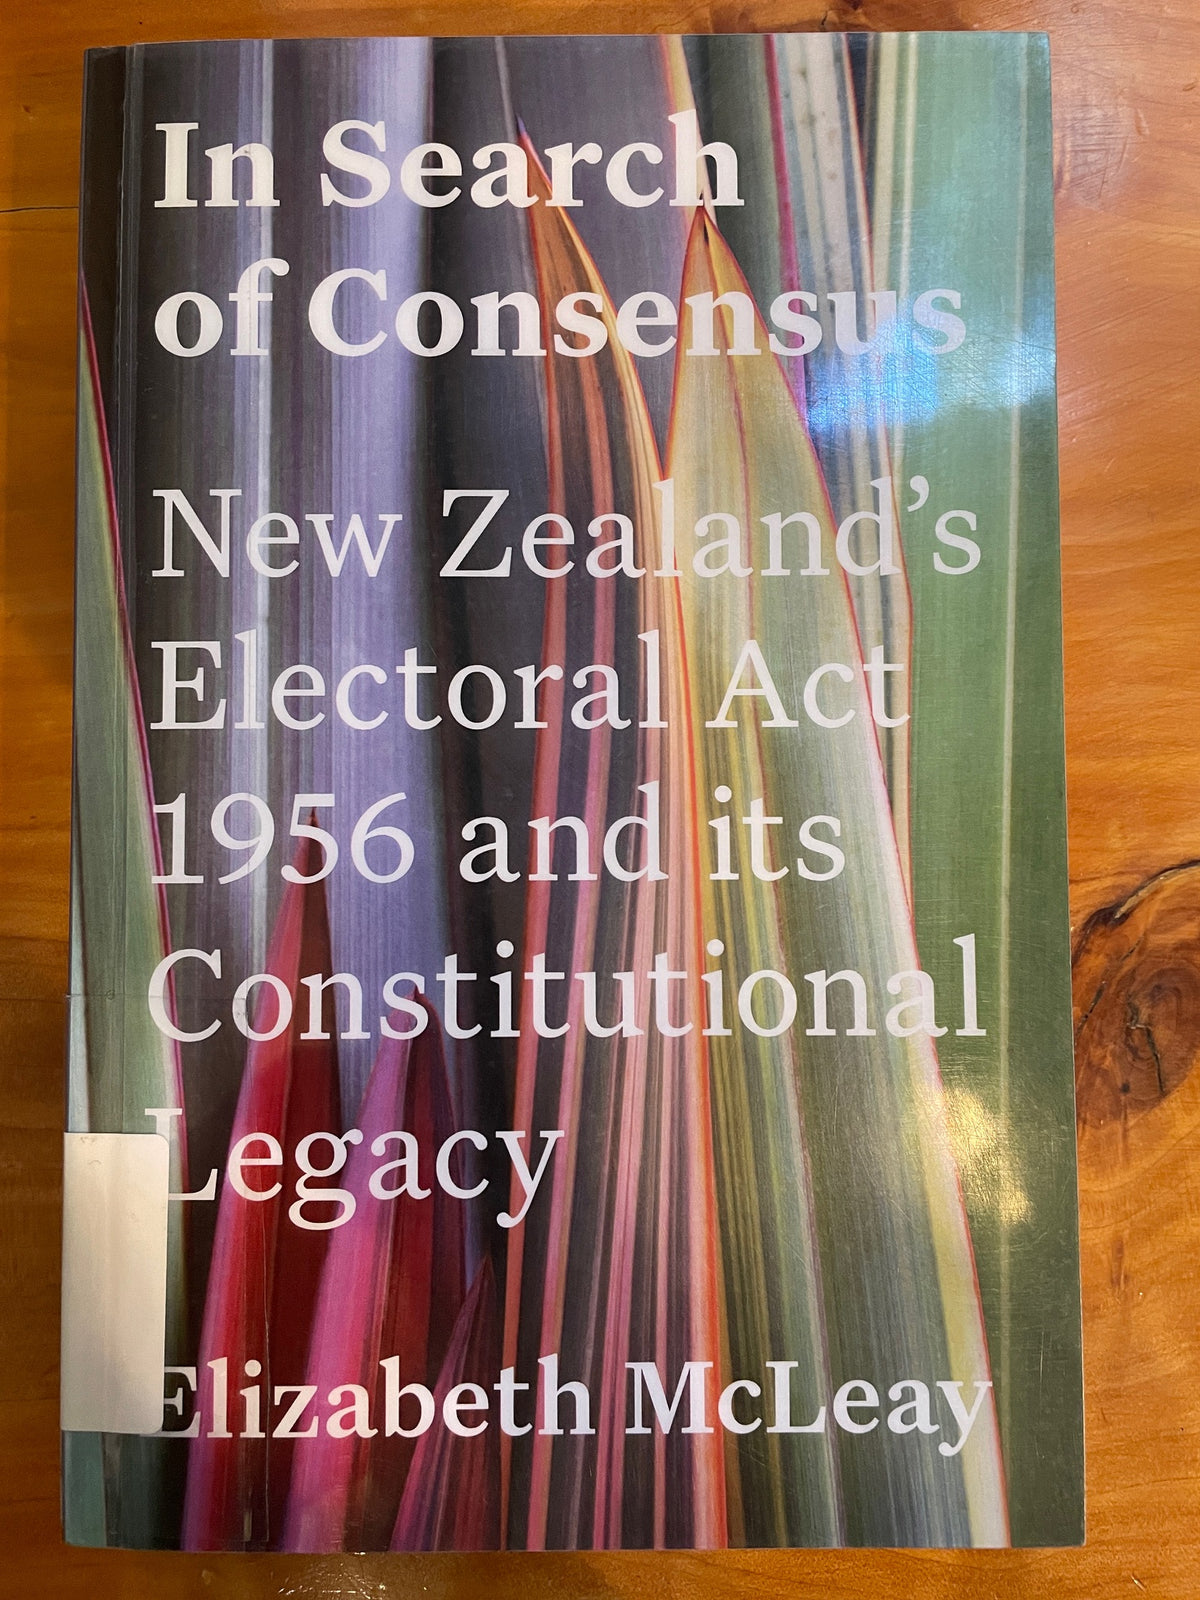 In Search of Consensus: New Zealand's Electoral Act 1956 and its Constitutional Legacy - Elizabeth McLeay